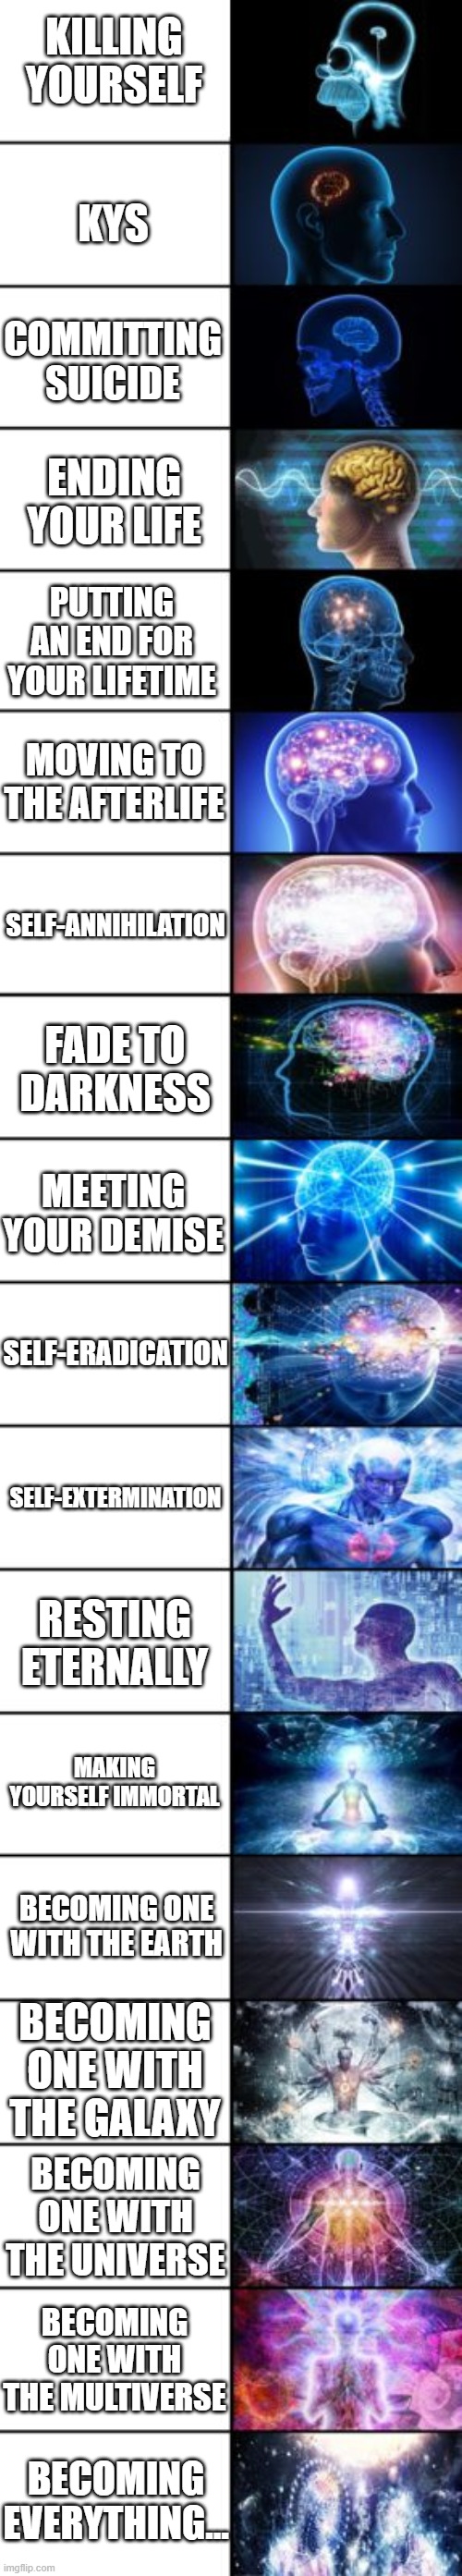 Expanding Brain longest version | KILLING YOURSELF; KYS; COMMITTING SUICIDE; ENDING YOUR LIFE; PUTTING AN END FOR YOUR LIFETIME; MOVING TO THE AFTERLIFE; SELF-ANNIHILATION; FADE TO DARKNESS; MEETING YOUR DEMISE; SELF-ERADICATION; SELF-EXTERMINATION; RESTING ETERNALLY; MAKING YOURSELF IMMORTAL; BECOMING ONE WITH THE EARTH; BECOMING ONE WITH THE GALAXY; BECOMING ONE WITH THE UNIVERSE; BECOMING ONE WITH THE MULTIVERSE; BECOMING EVERYTHING... | image tagged in expanding brain longest version | made w/ Imgflip meme maker